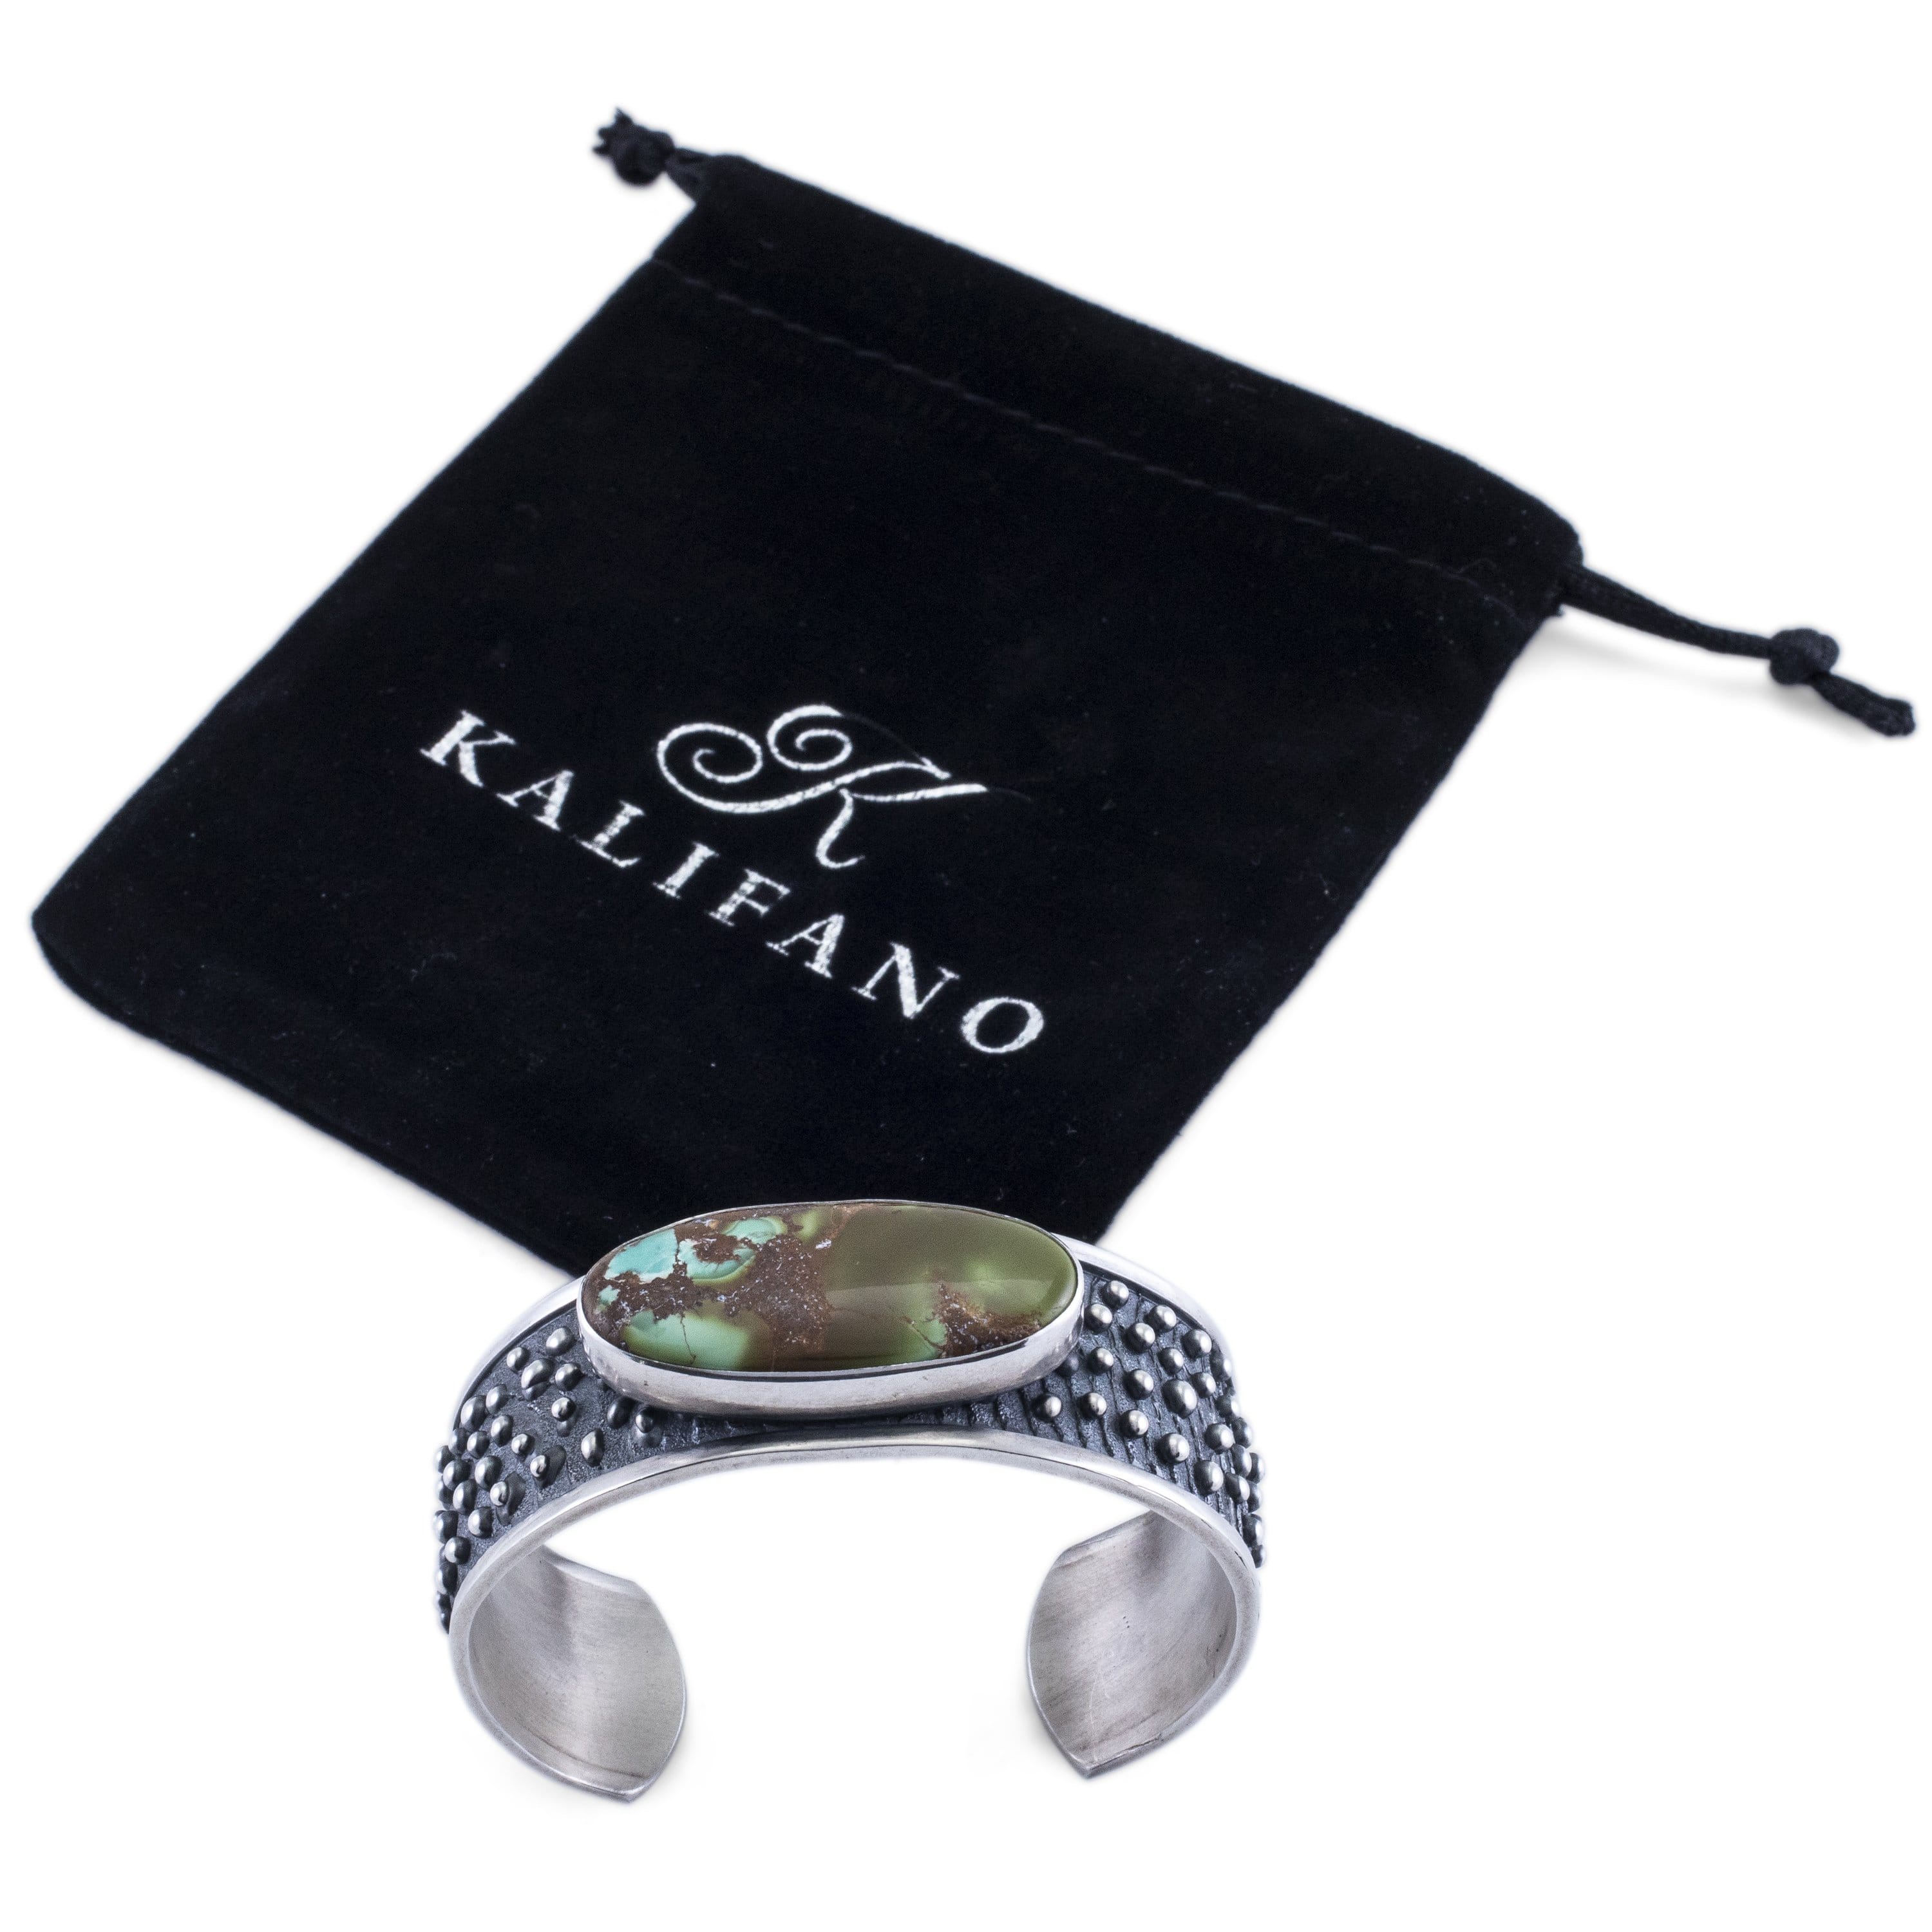 Kalifano Native American Jewelry Royston Turquoise USA Native American Made 925 Sterling Silver Cuff NAB2600.002